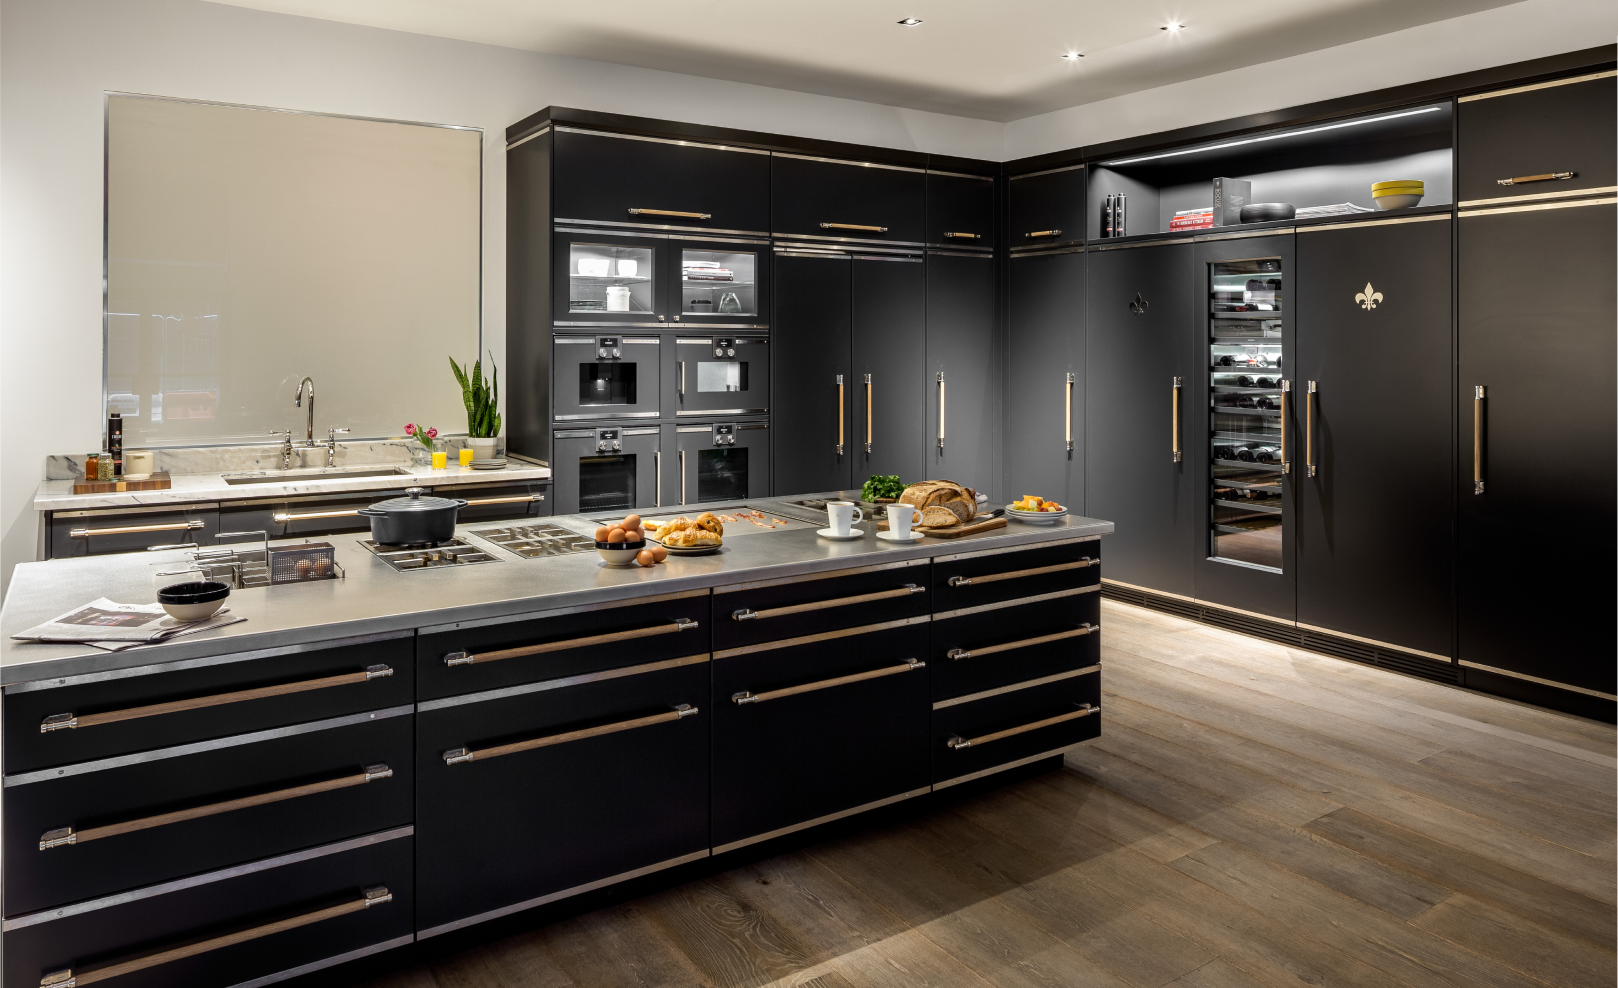 Black Kitchen Cabinets With Black Base Cabinets and Silver Countertop